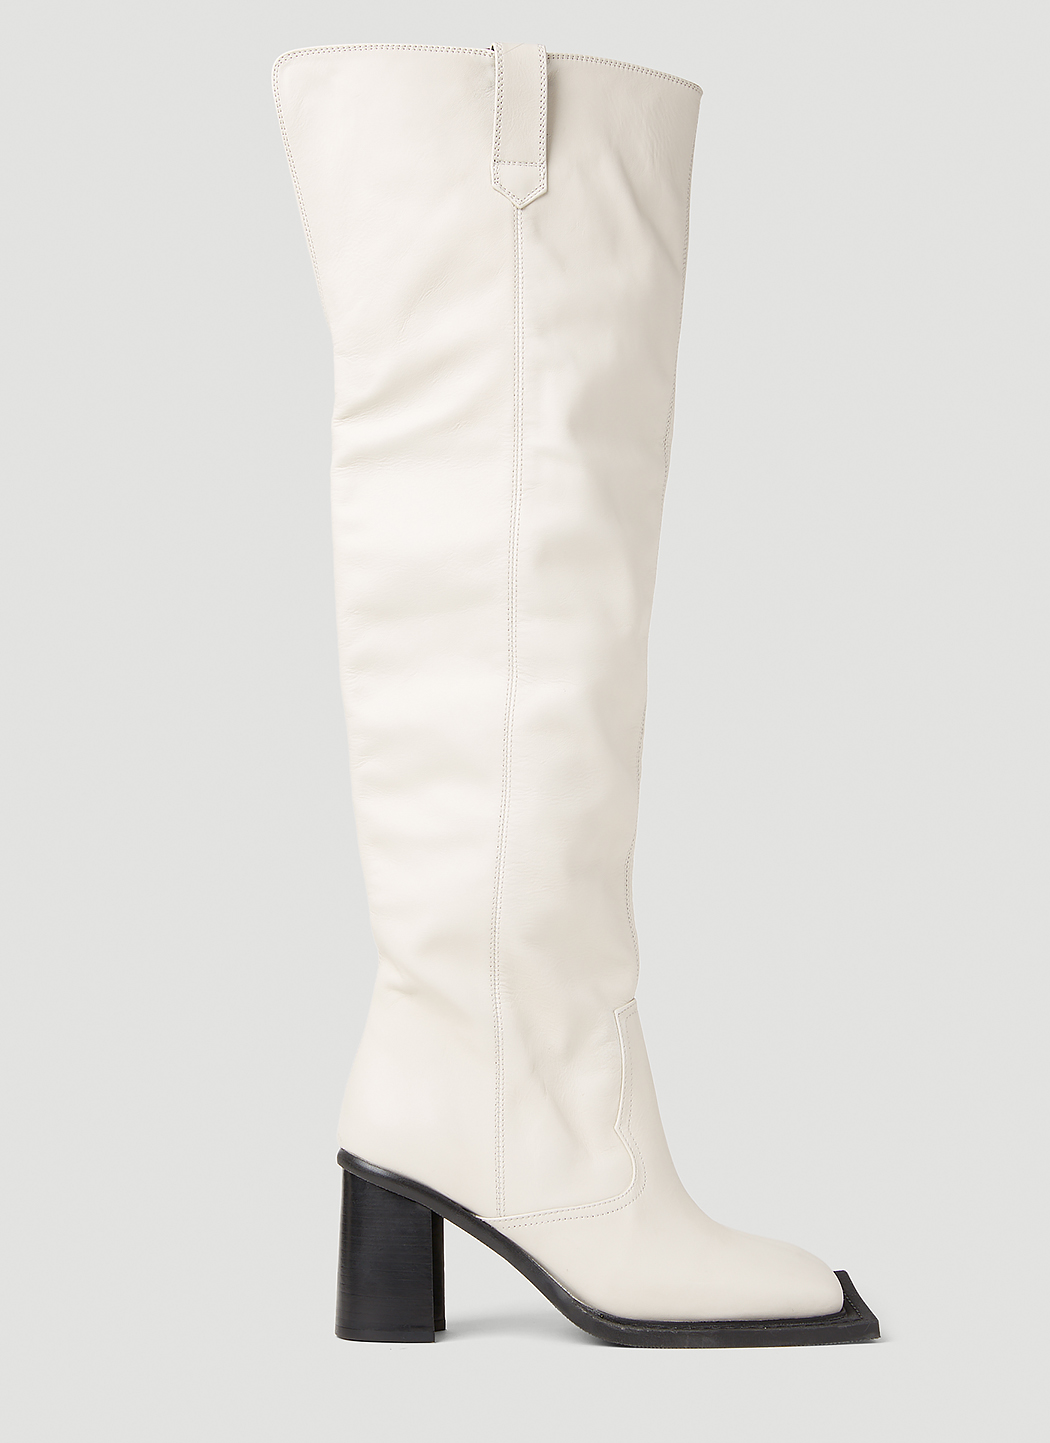 Howl Knee High Boots